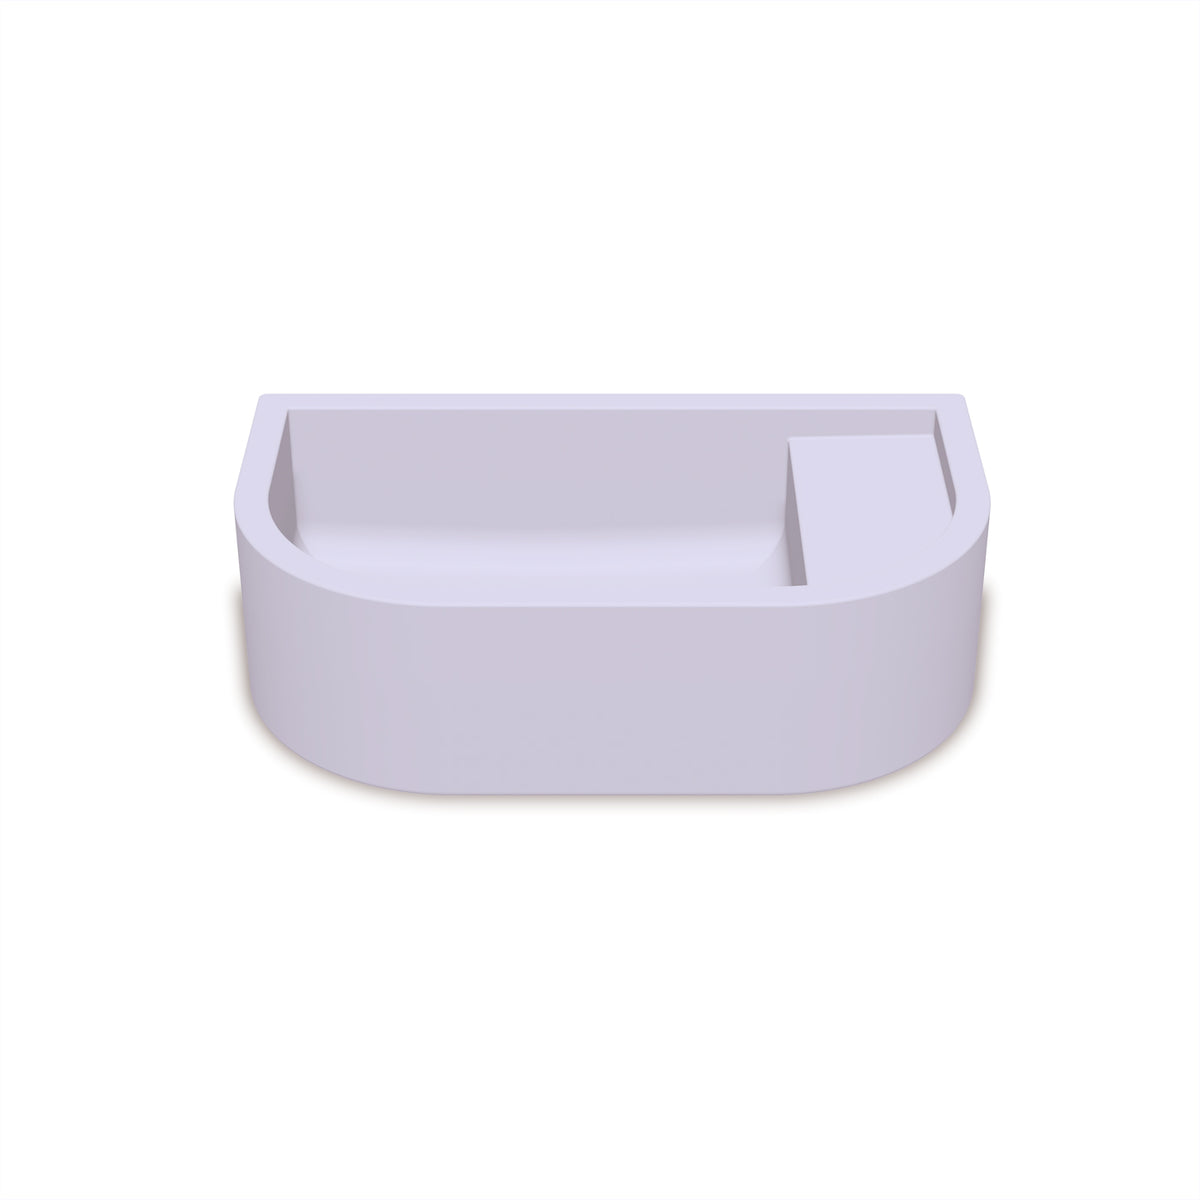 Loop 01 Basin - Surface Mount (Lilac,No Tap Hole)